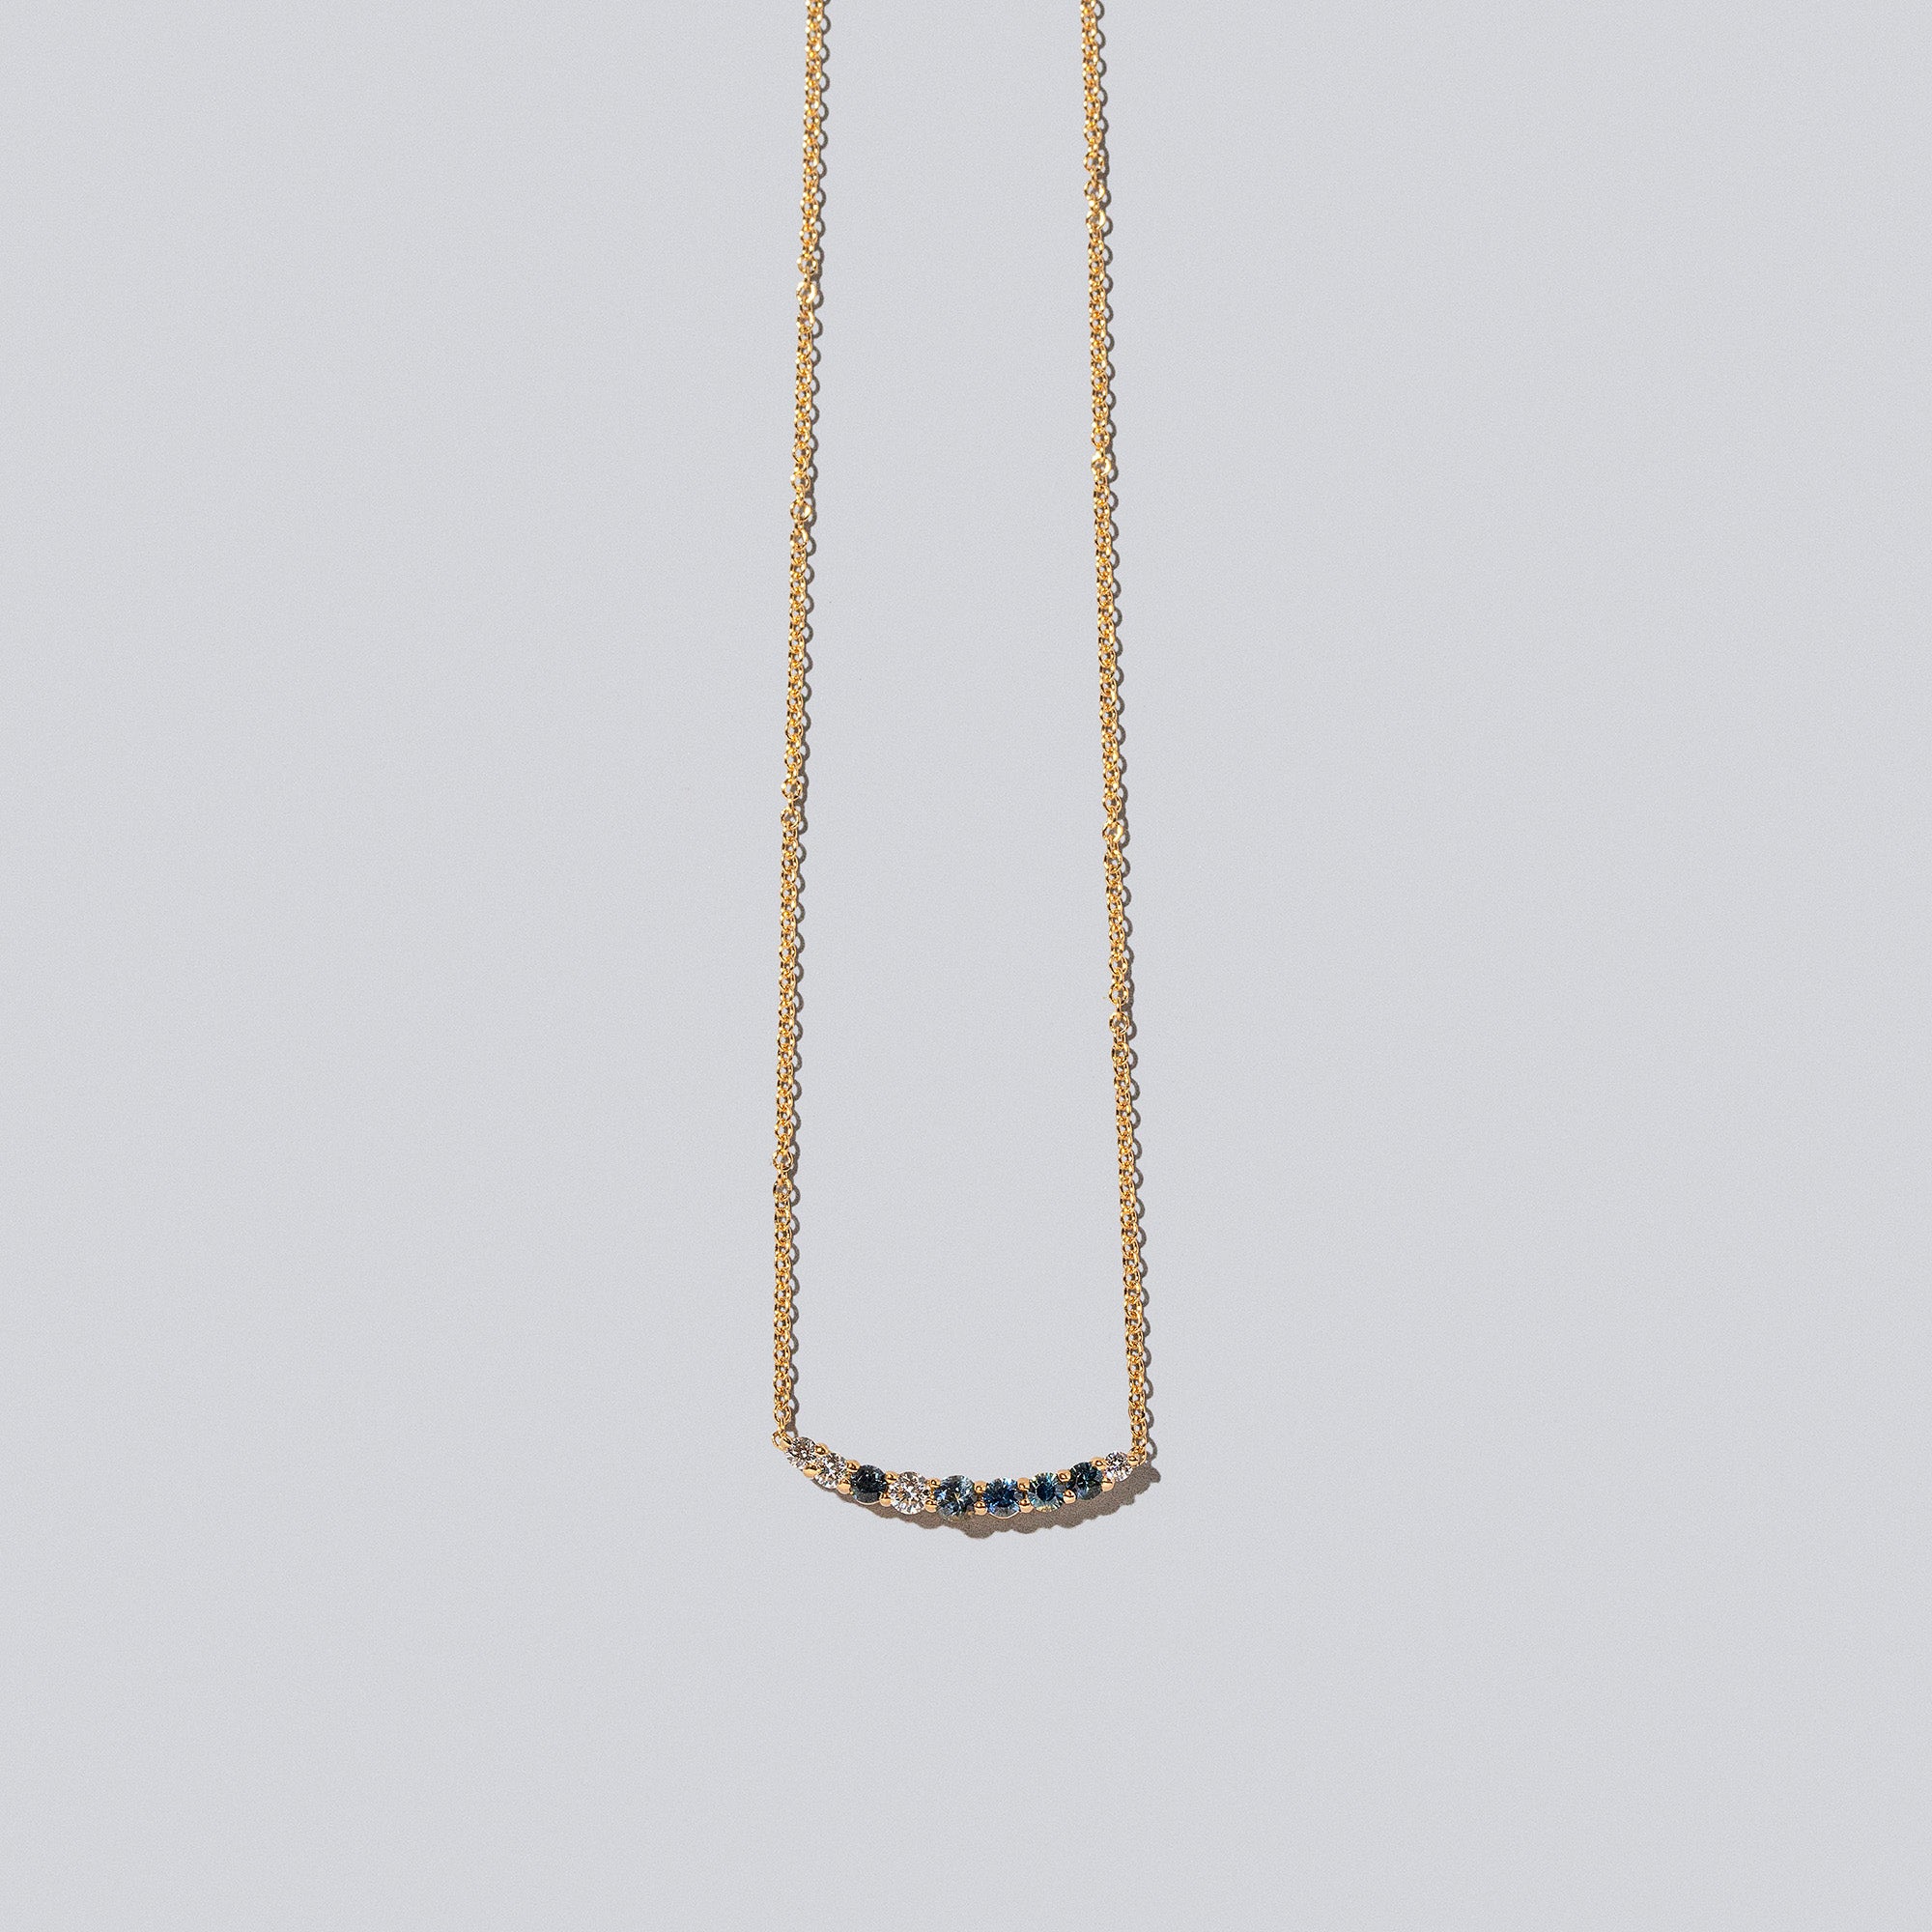 product_details::Sapphire & White Diamond Crescent Necklace on light color background.